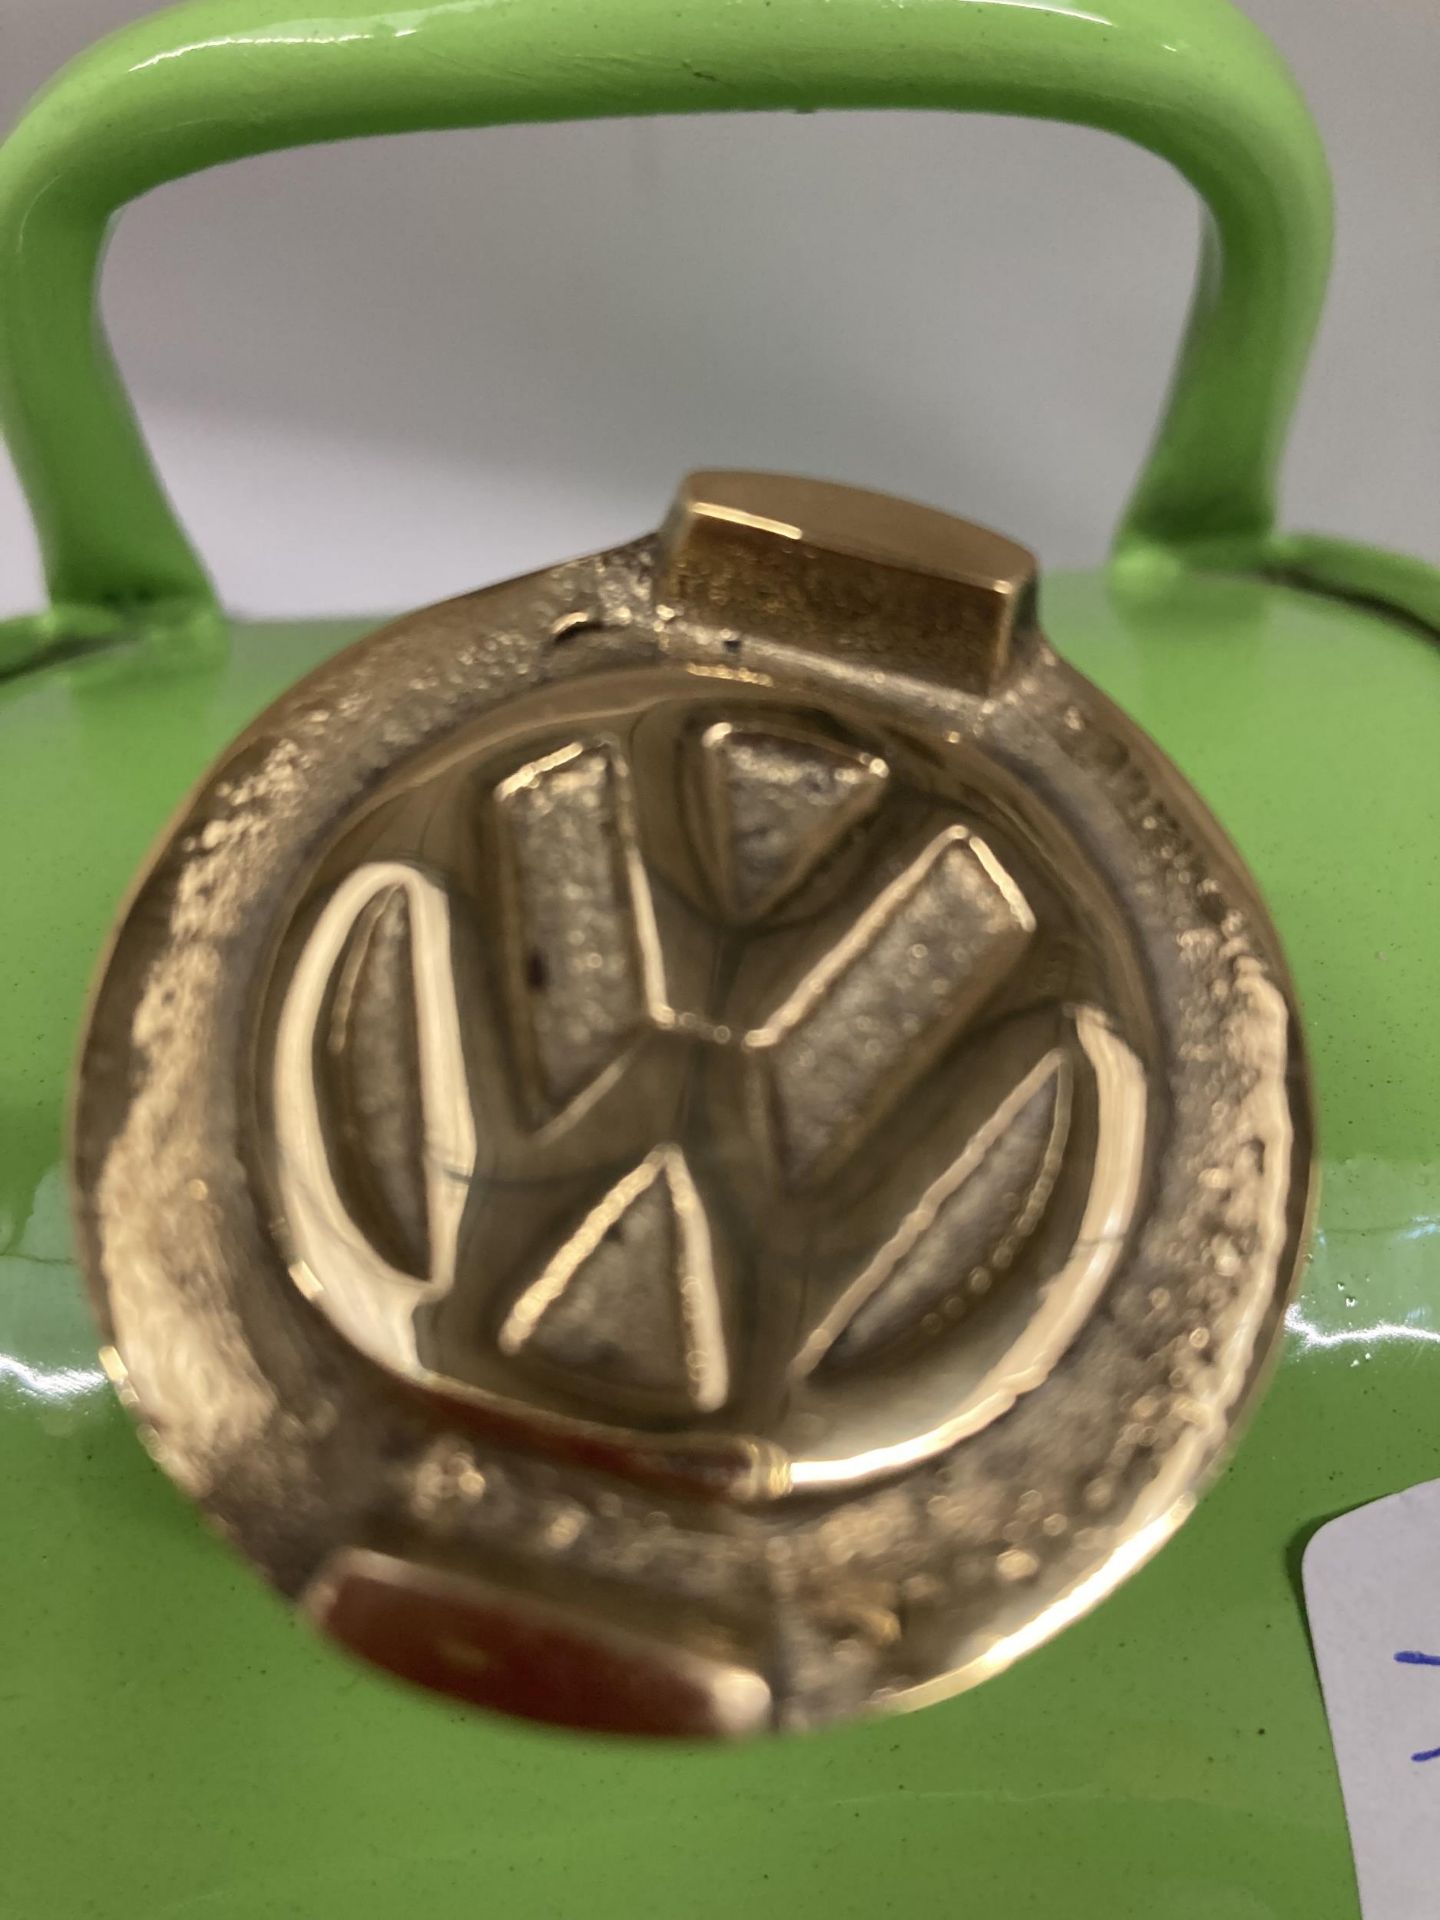 A GREEN VW METAL PETROL CAN WITH BRASS TOP - Image 3 of 3